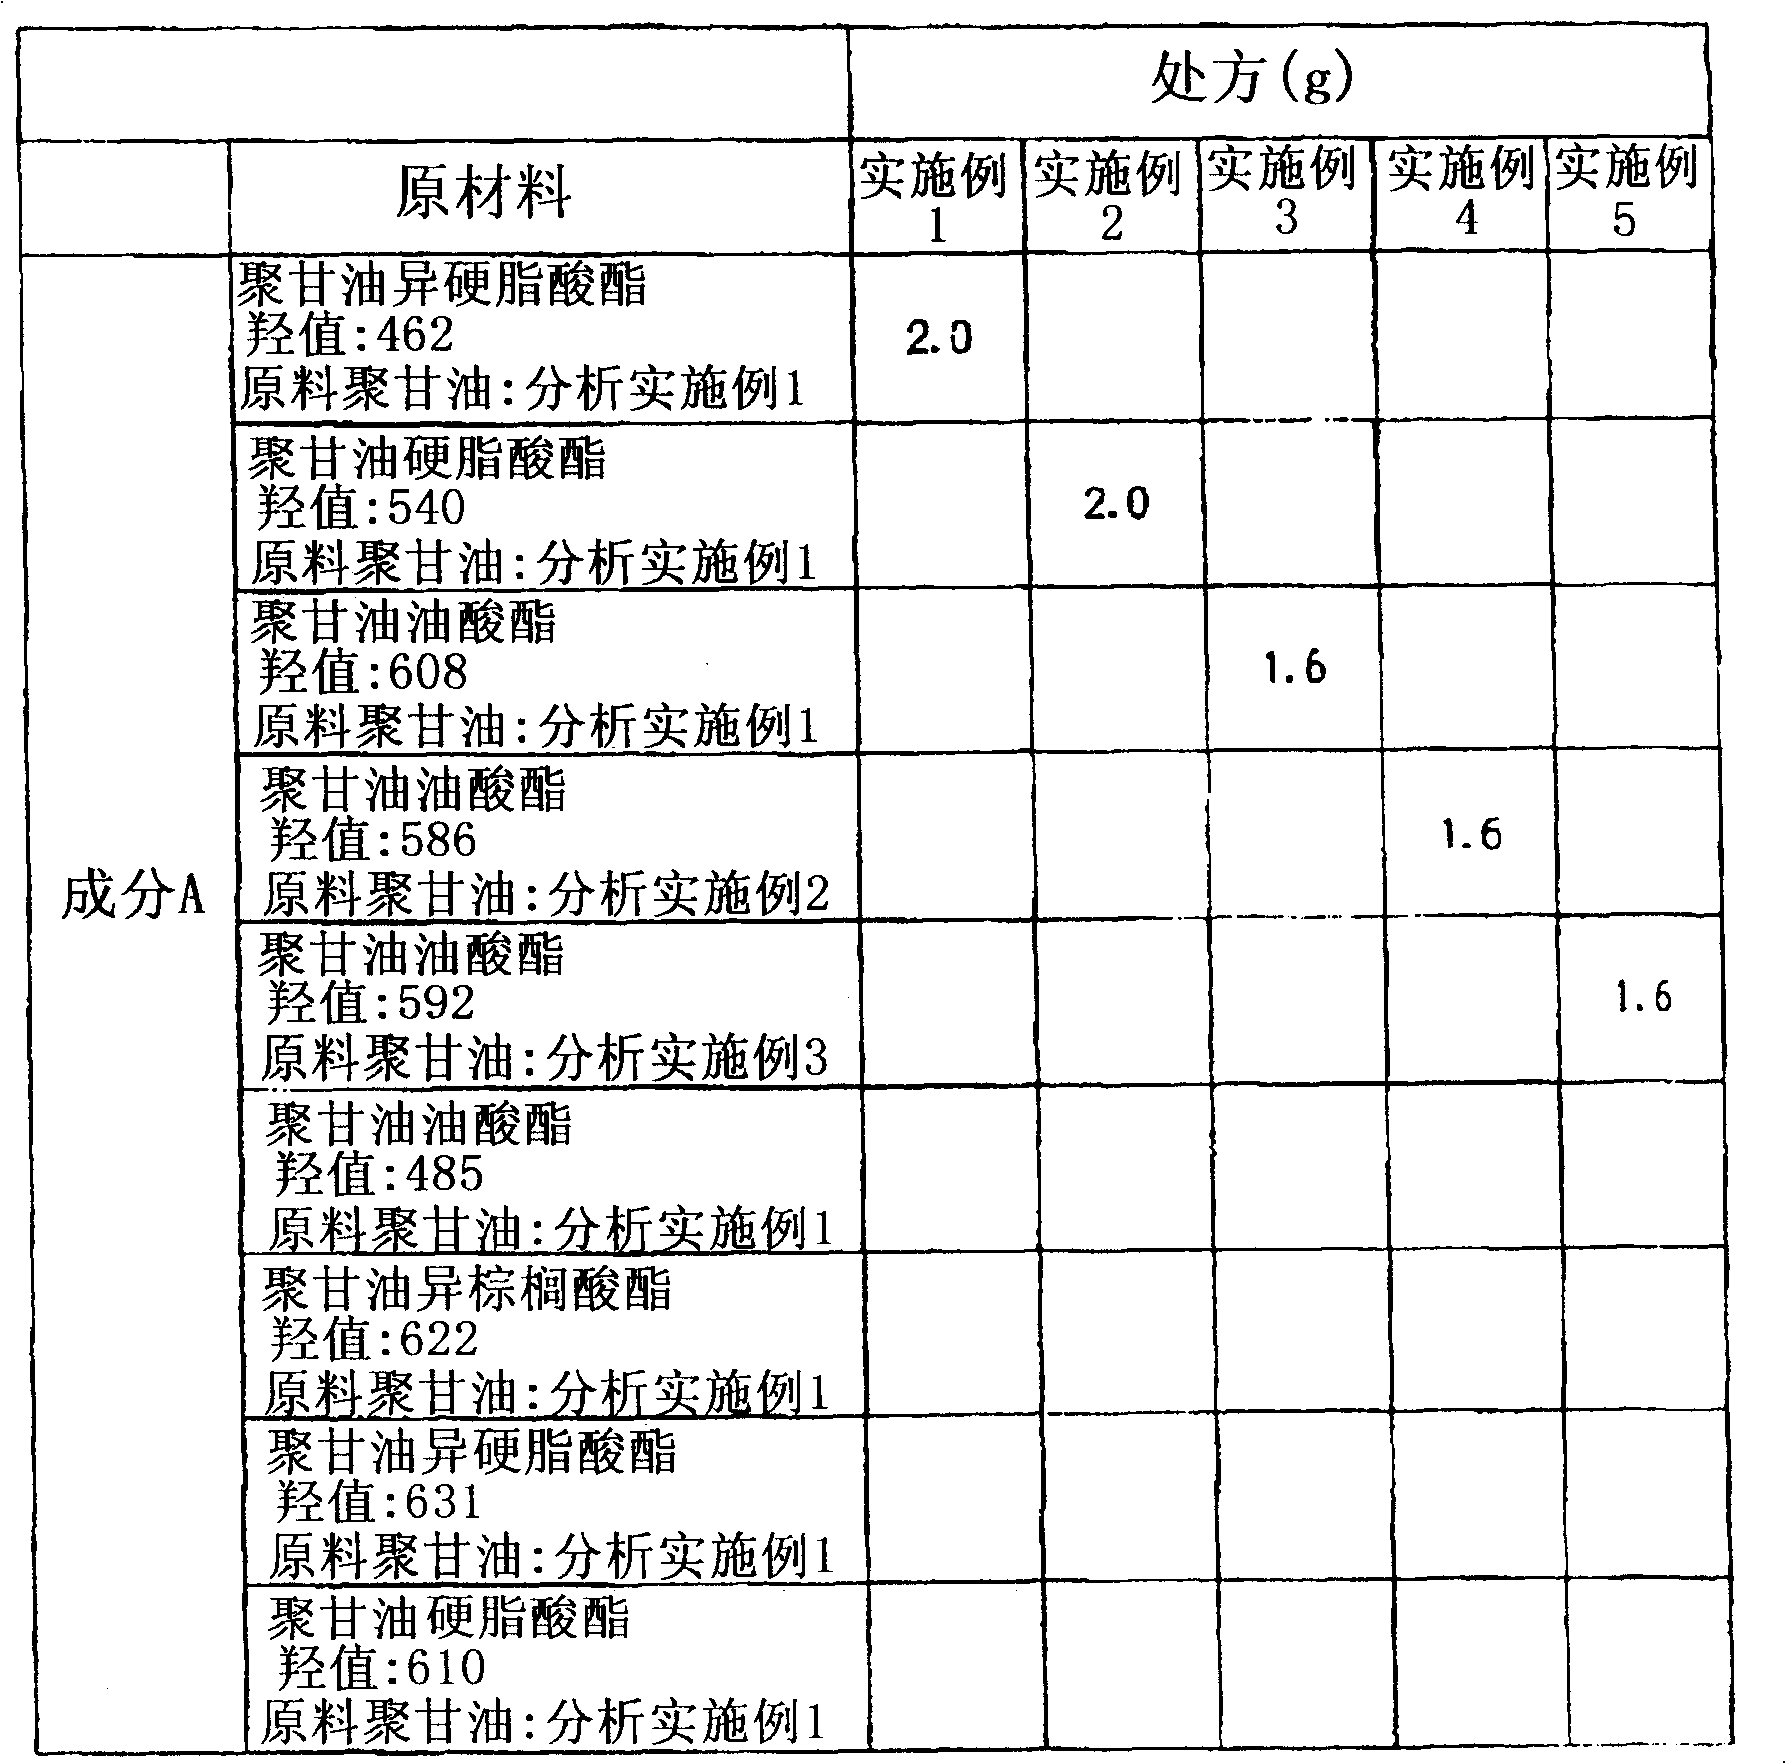 Oil-in-water-type emulsified cosmetic preparation and process for producing the same